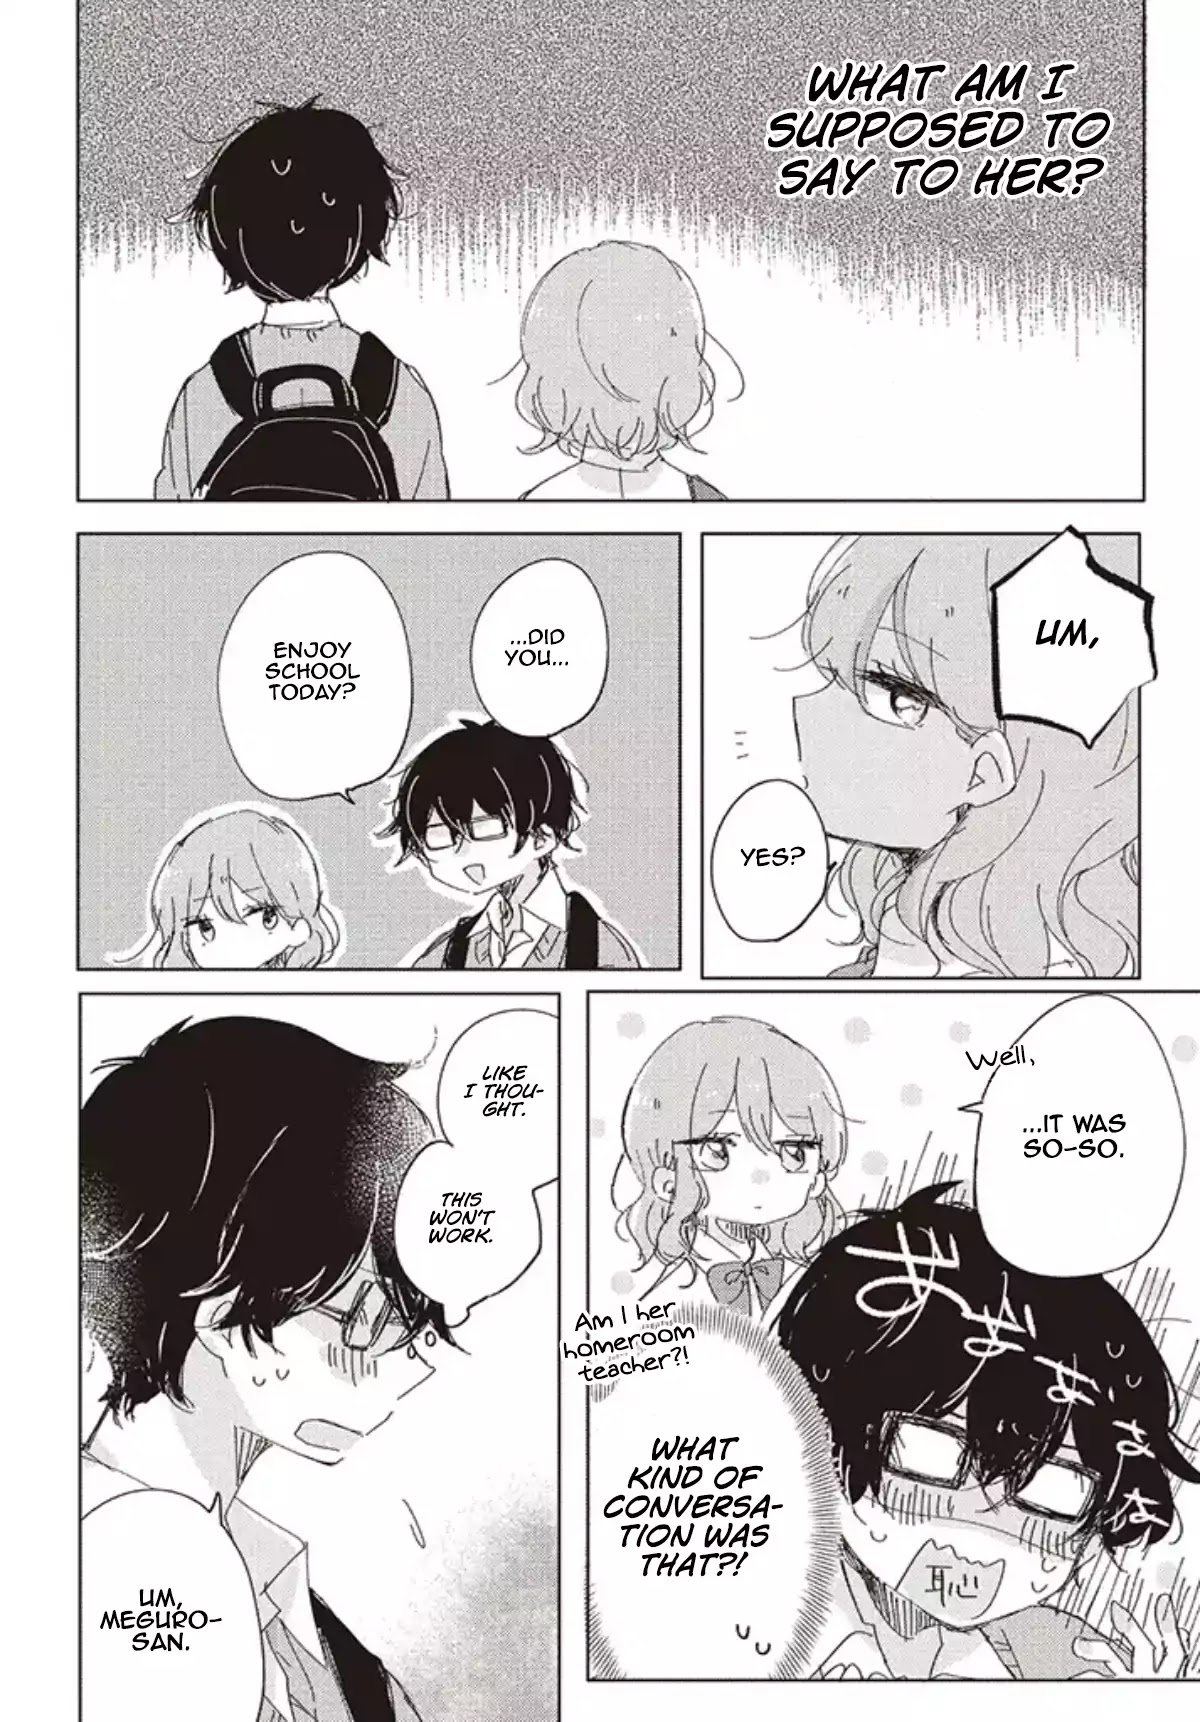 It's Not Meguro-san's First Time chapter 1 page 7